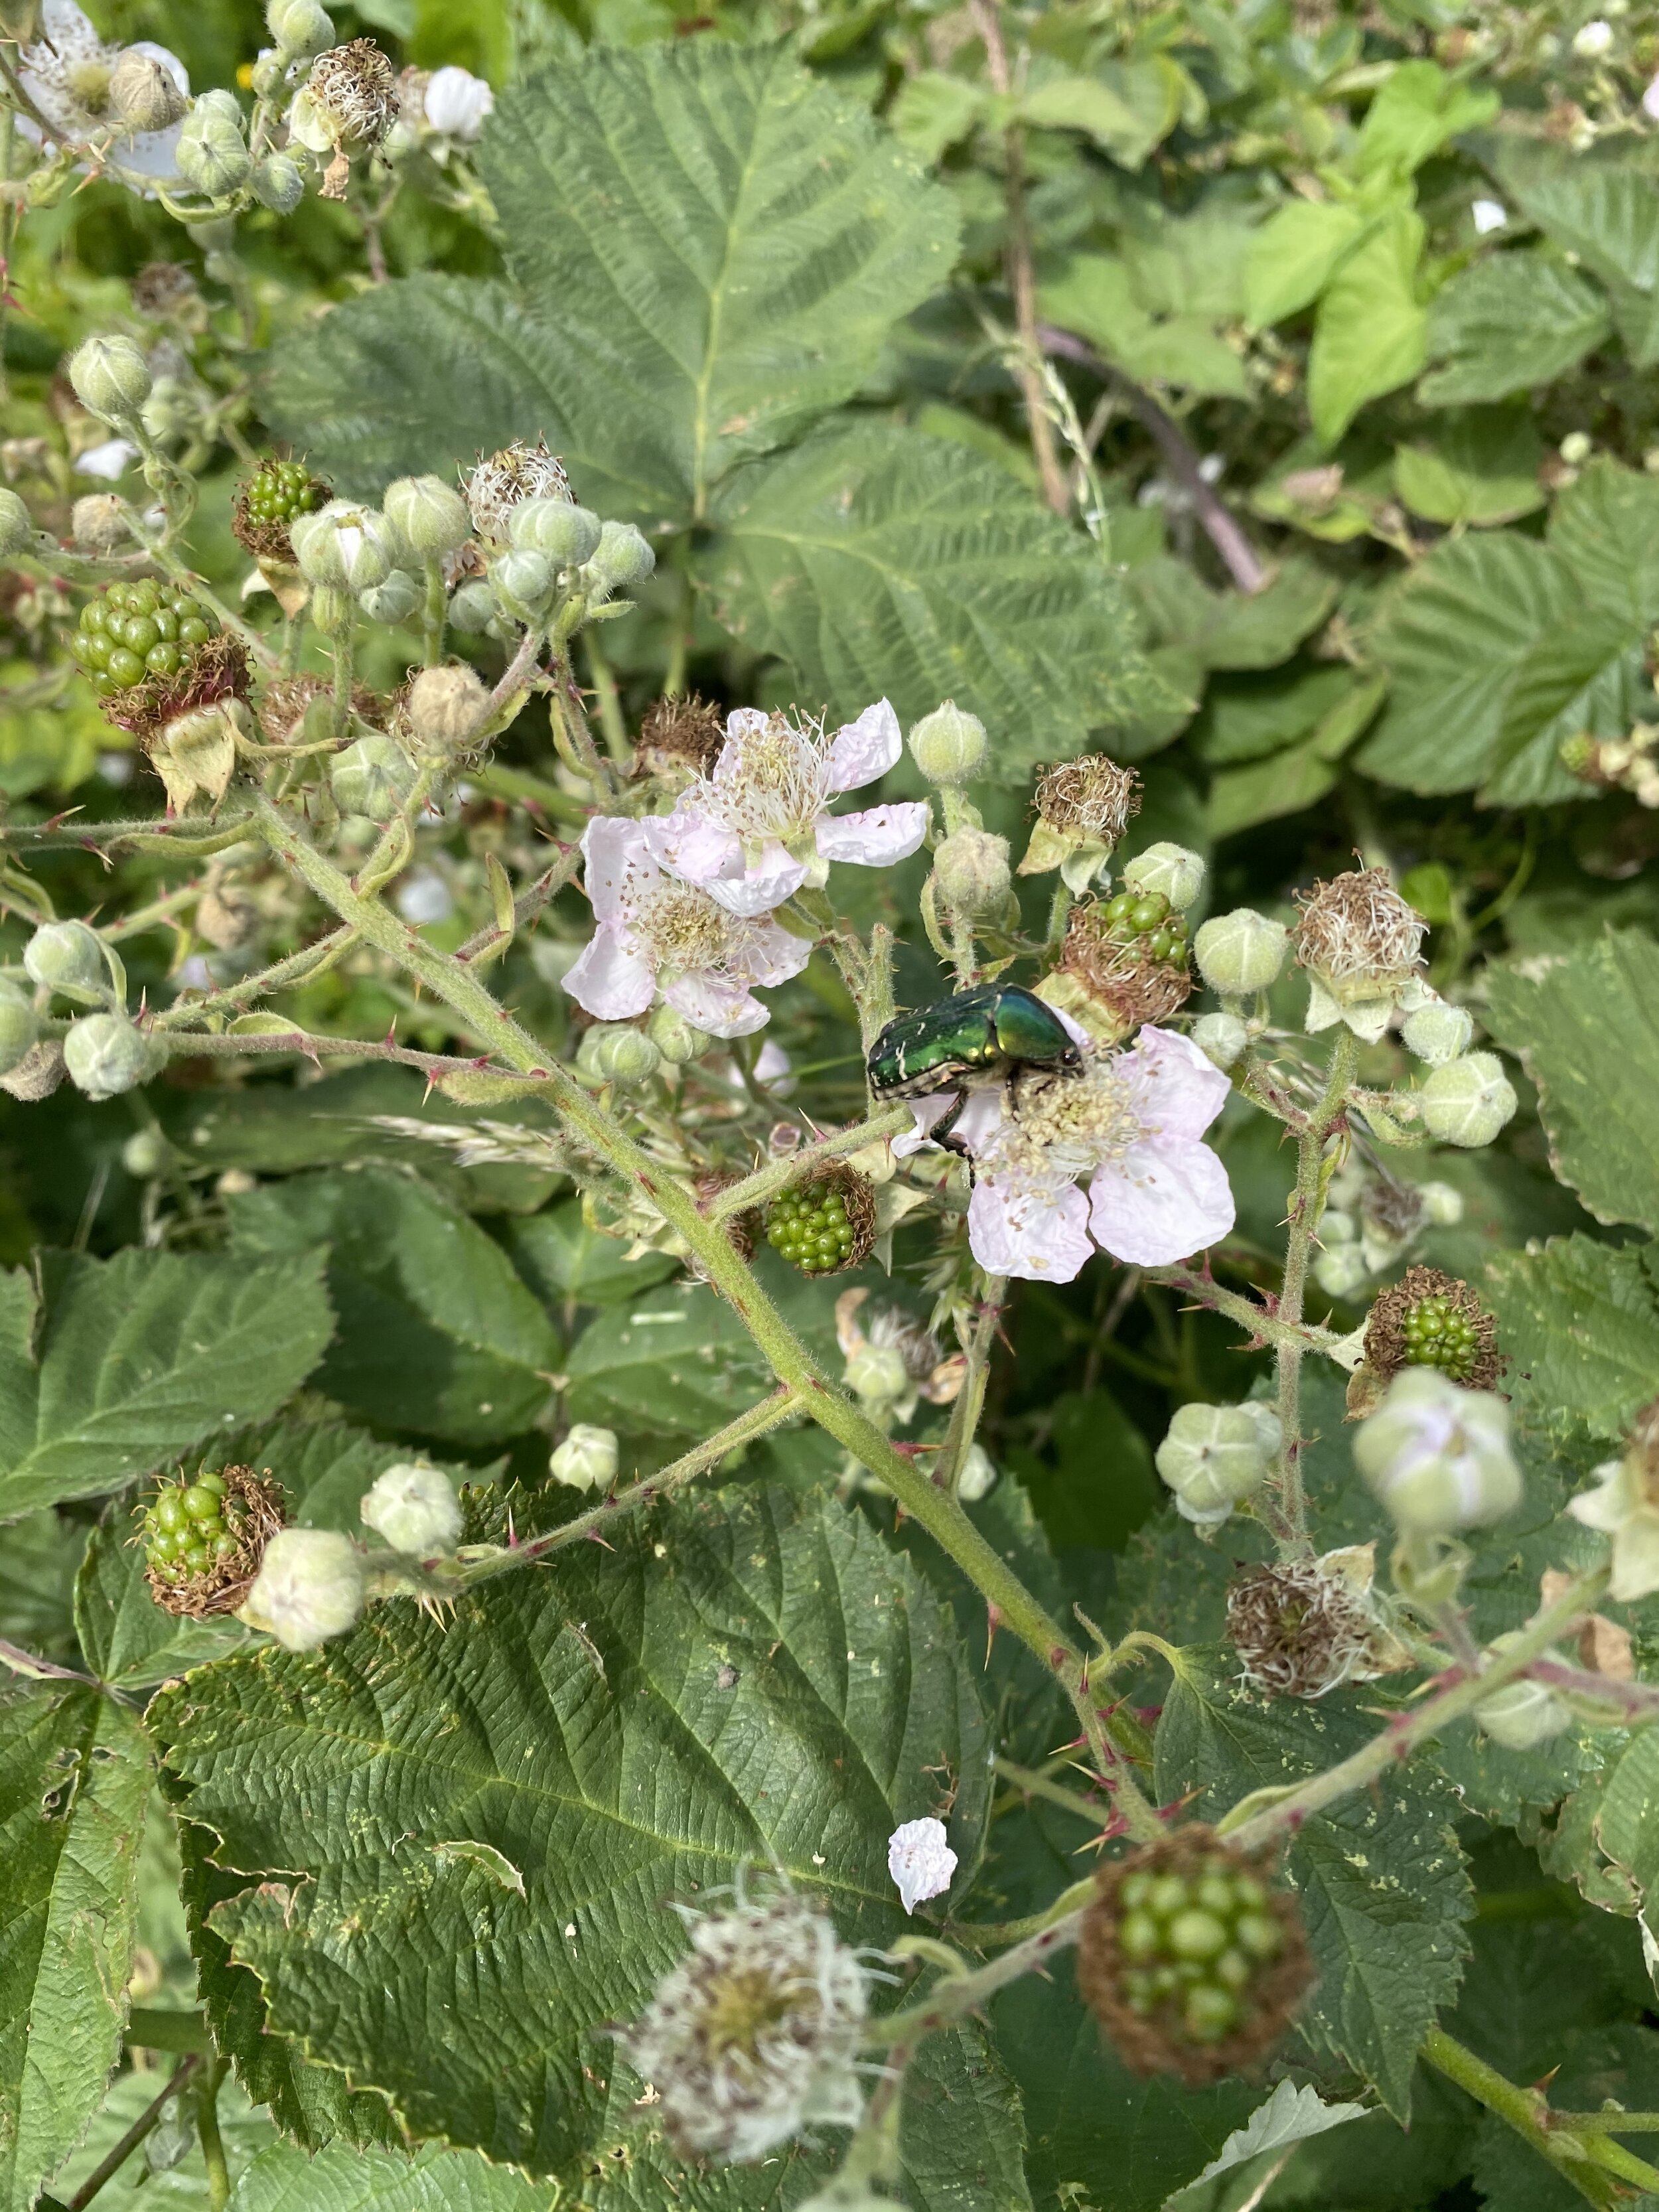 Blackberries, also of the rose family, are on the way too (much later though)!